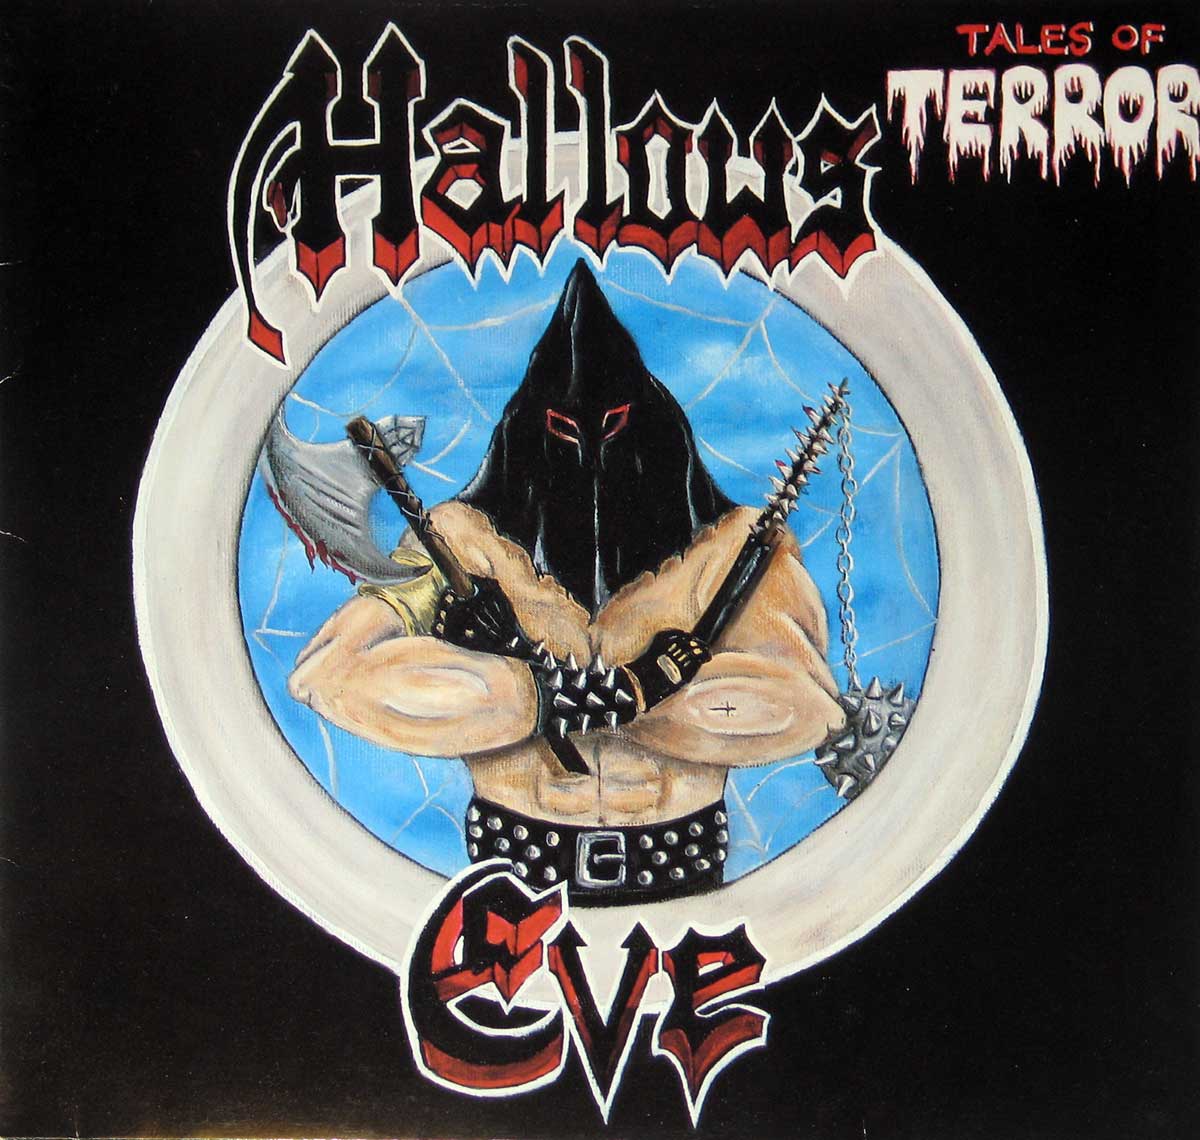 large album front cover photo of: Hallow's Eve  Tales of Terror 